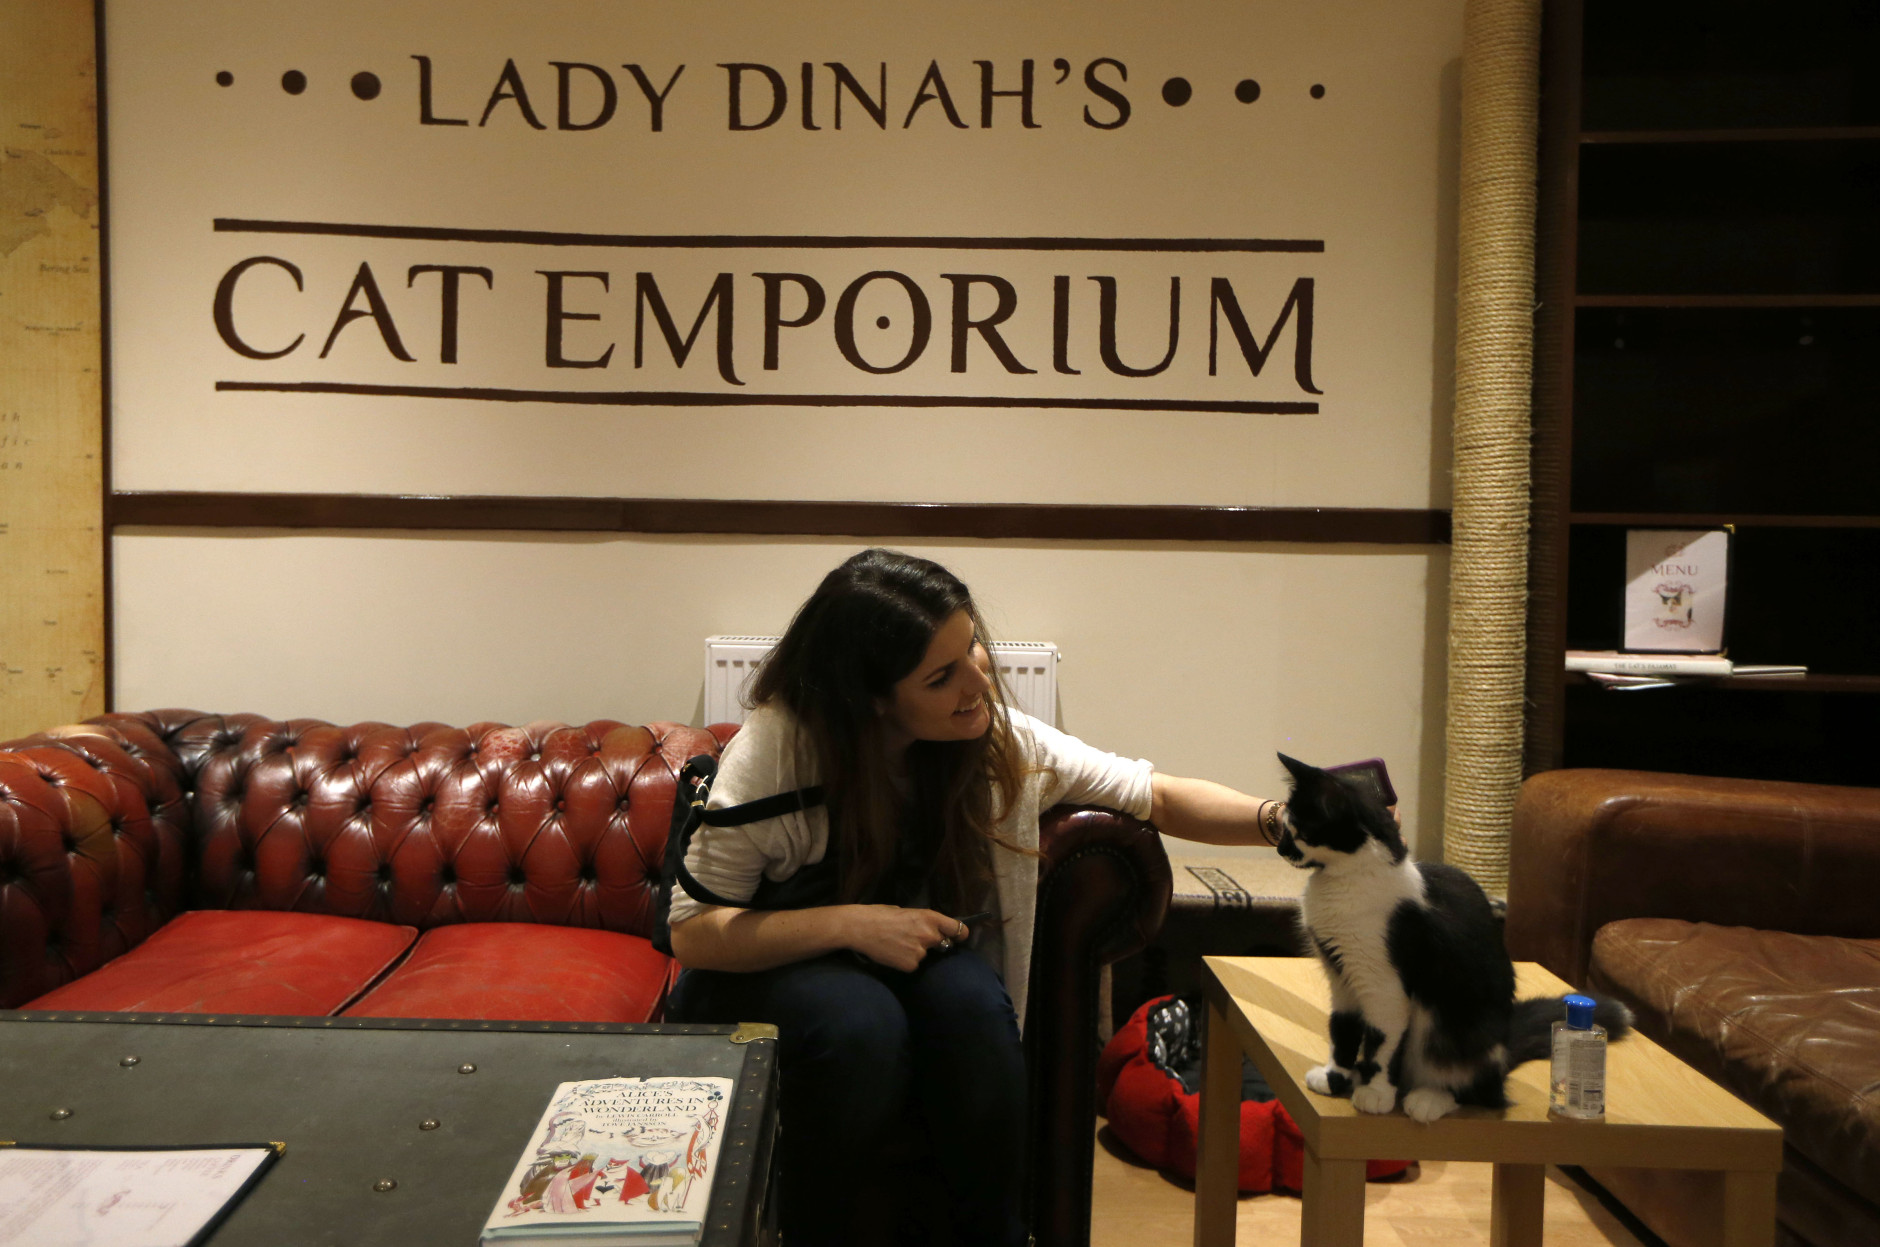 A visitor strokes a cat in the newly opened Lady Dinah's Cat Emporium in London, Friday, April 4, 2014.Feline company is exactly what one of Londons newest cafes is offering _ and stressed-out city-dwellers are lapping it up.  People do want to have pets and in tiny flats, you cant, said cafe owner Lauren Pears, who opened Lady Dinahs Cat Emporium last month in an area east of the citys financial district.  (AP Photo/Sang Tan)